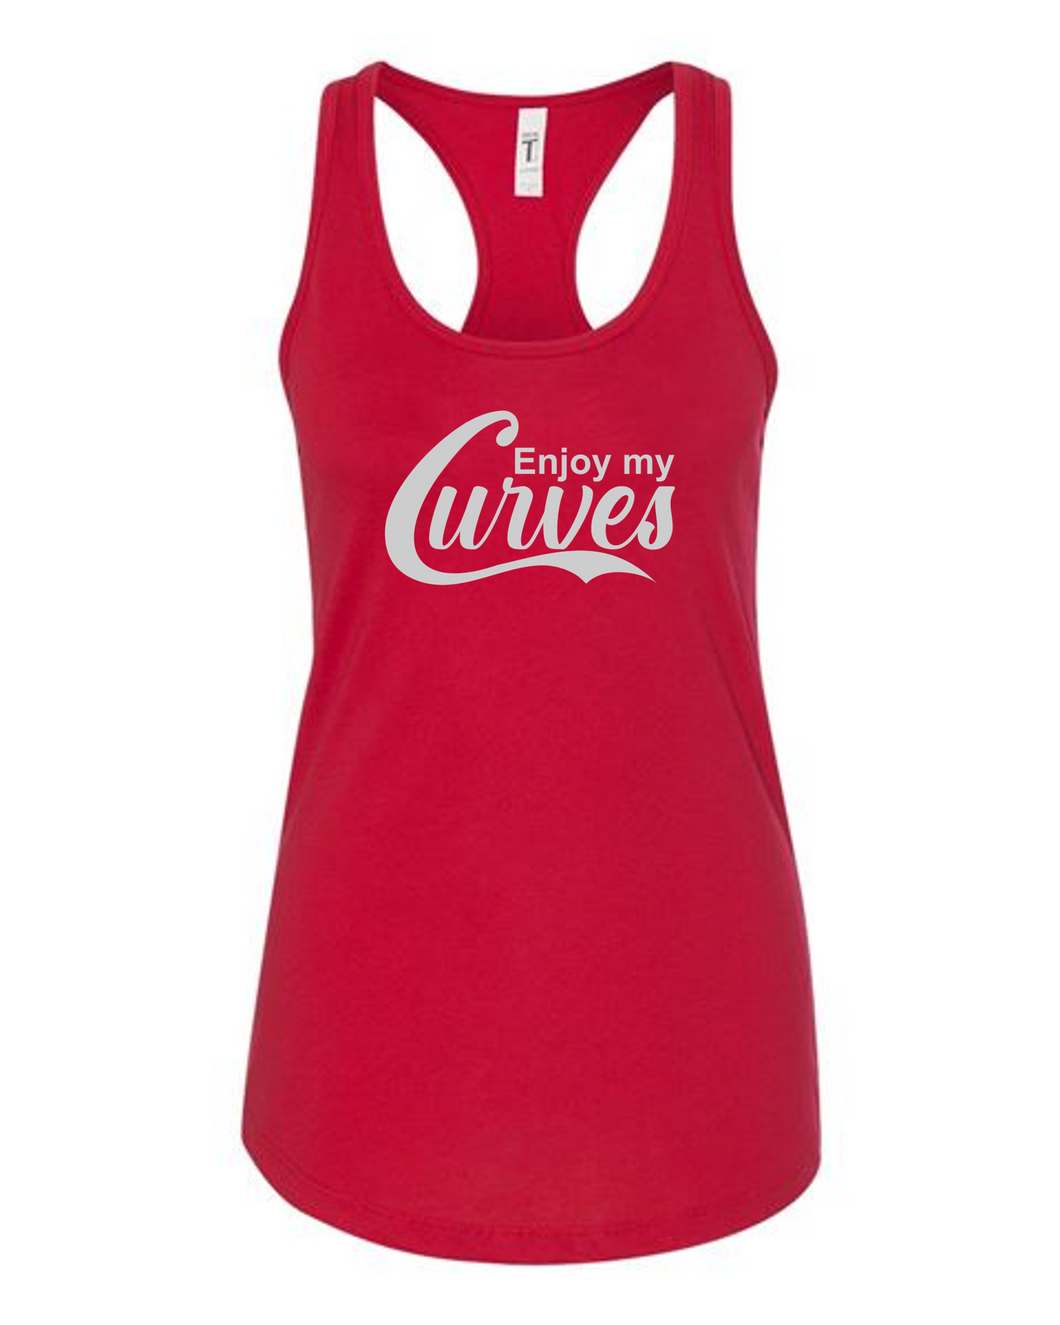 Curves (Tank and Tee)